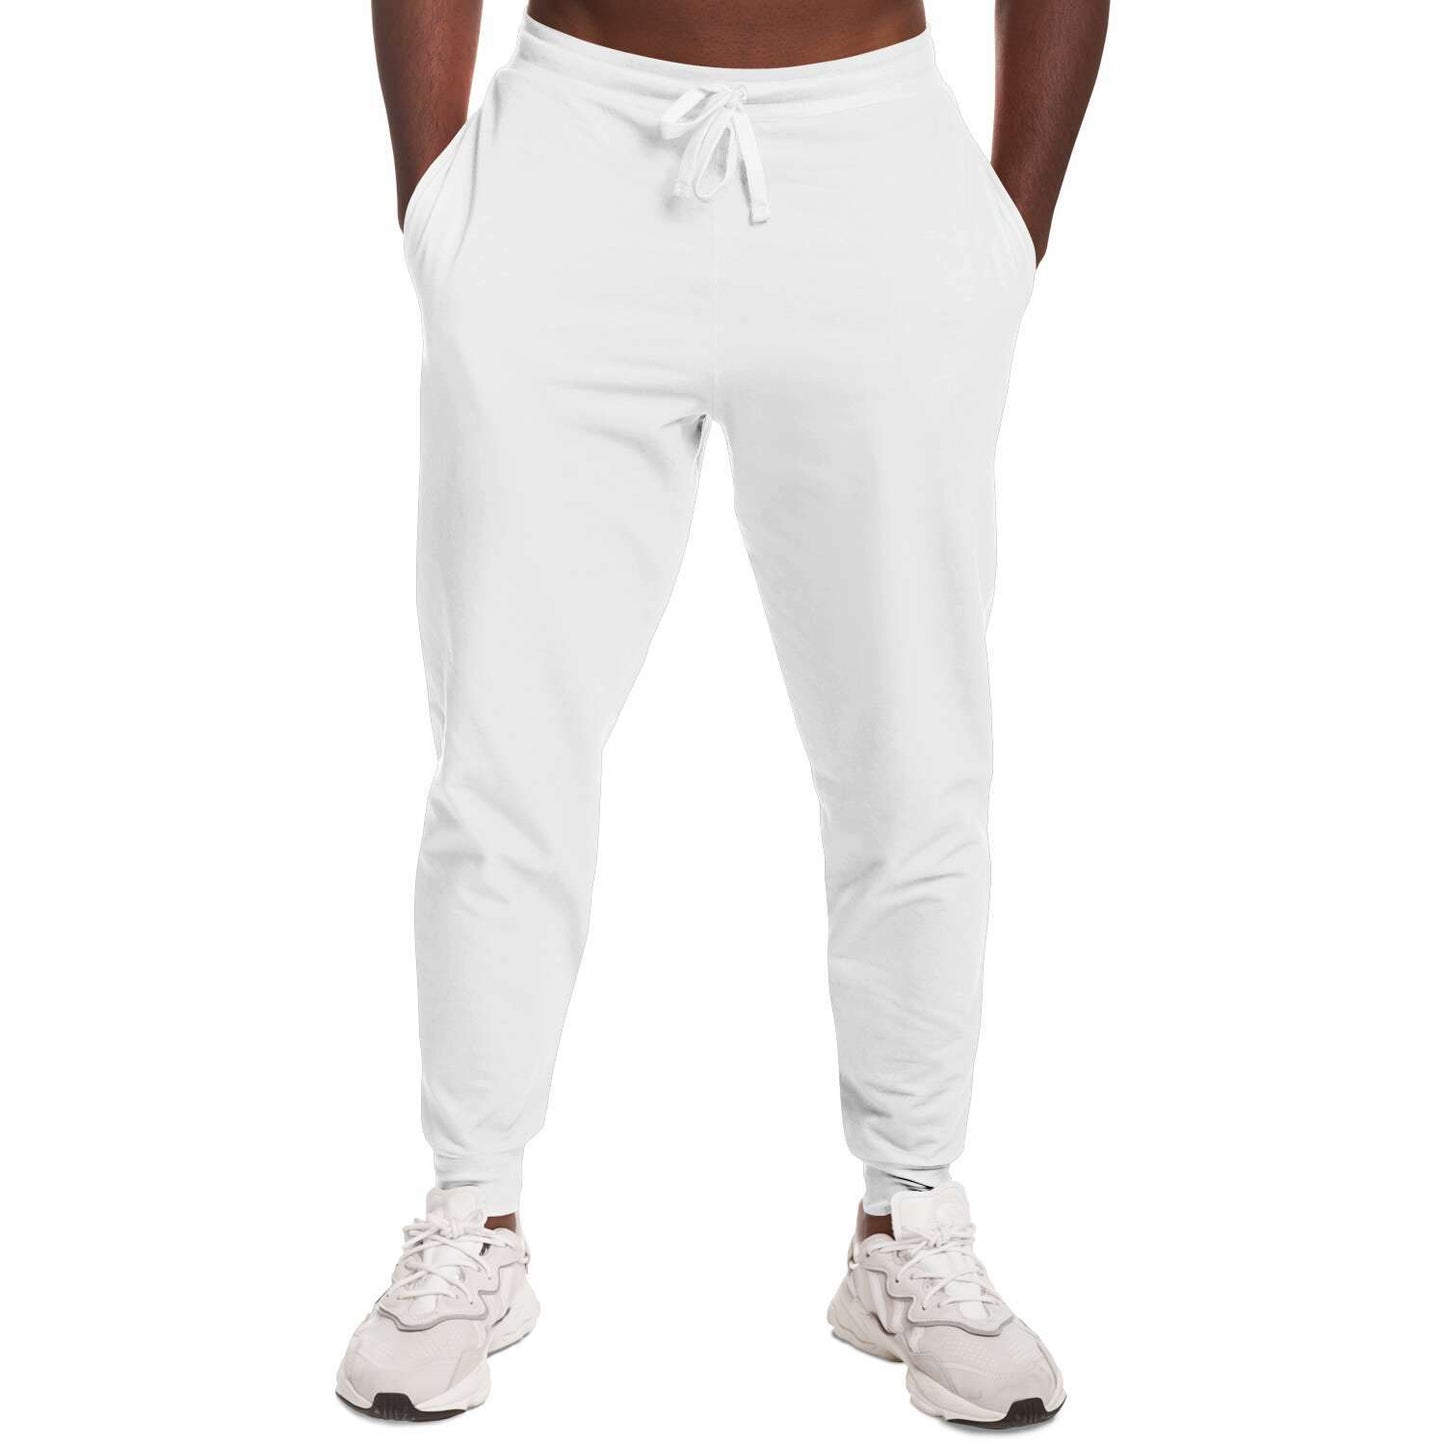 Black History Month White Joggers